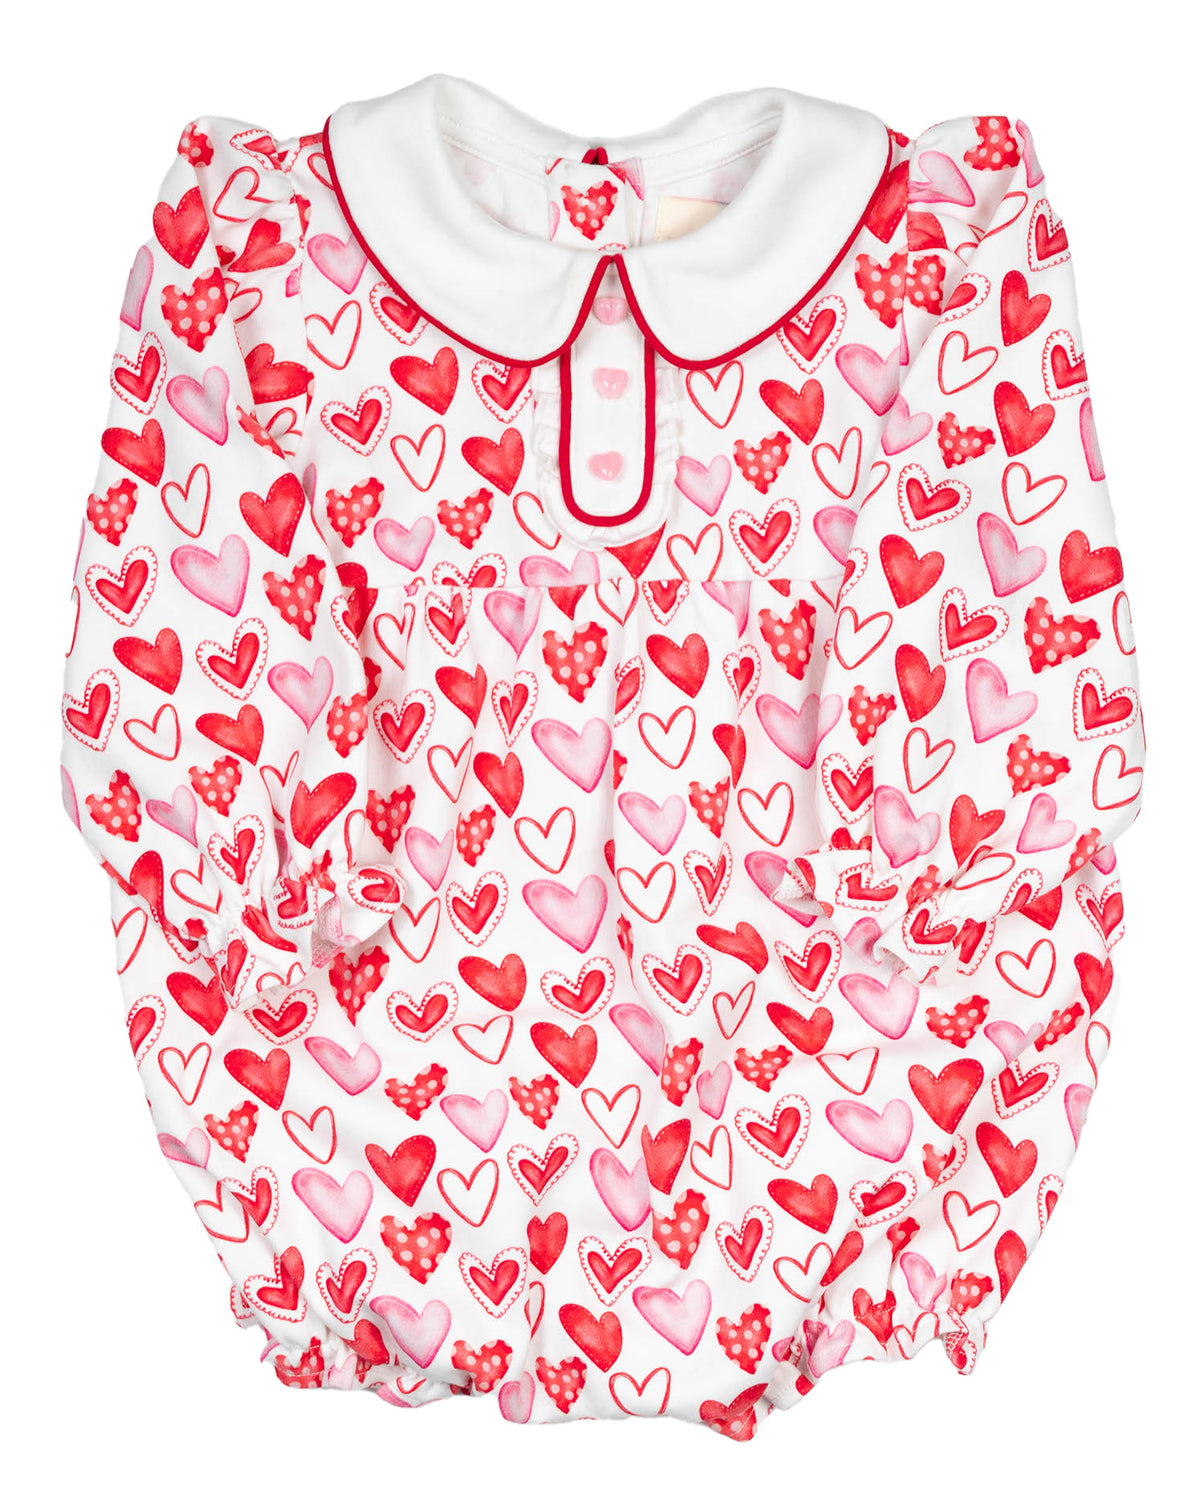 Whimsical Hearts Knit Bubble